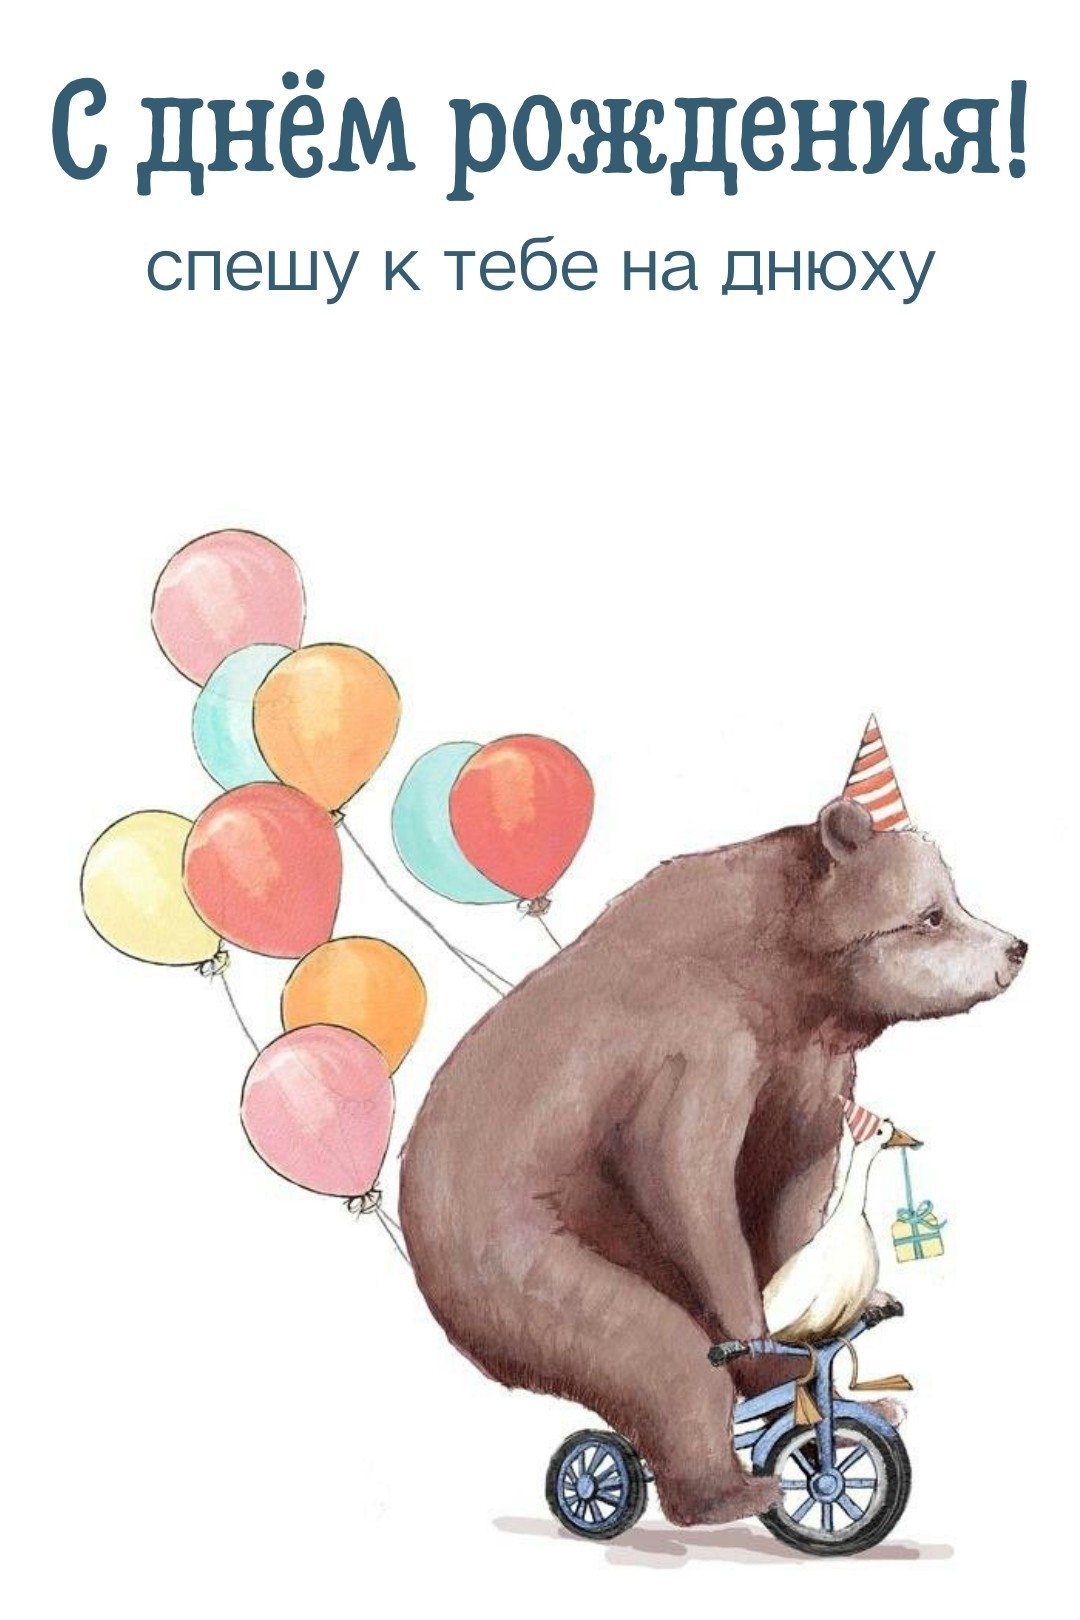 Cute Russian Birthday Picture For Woman